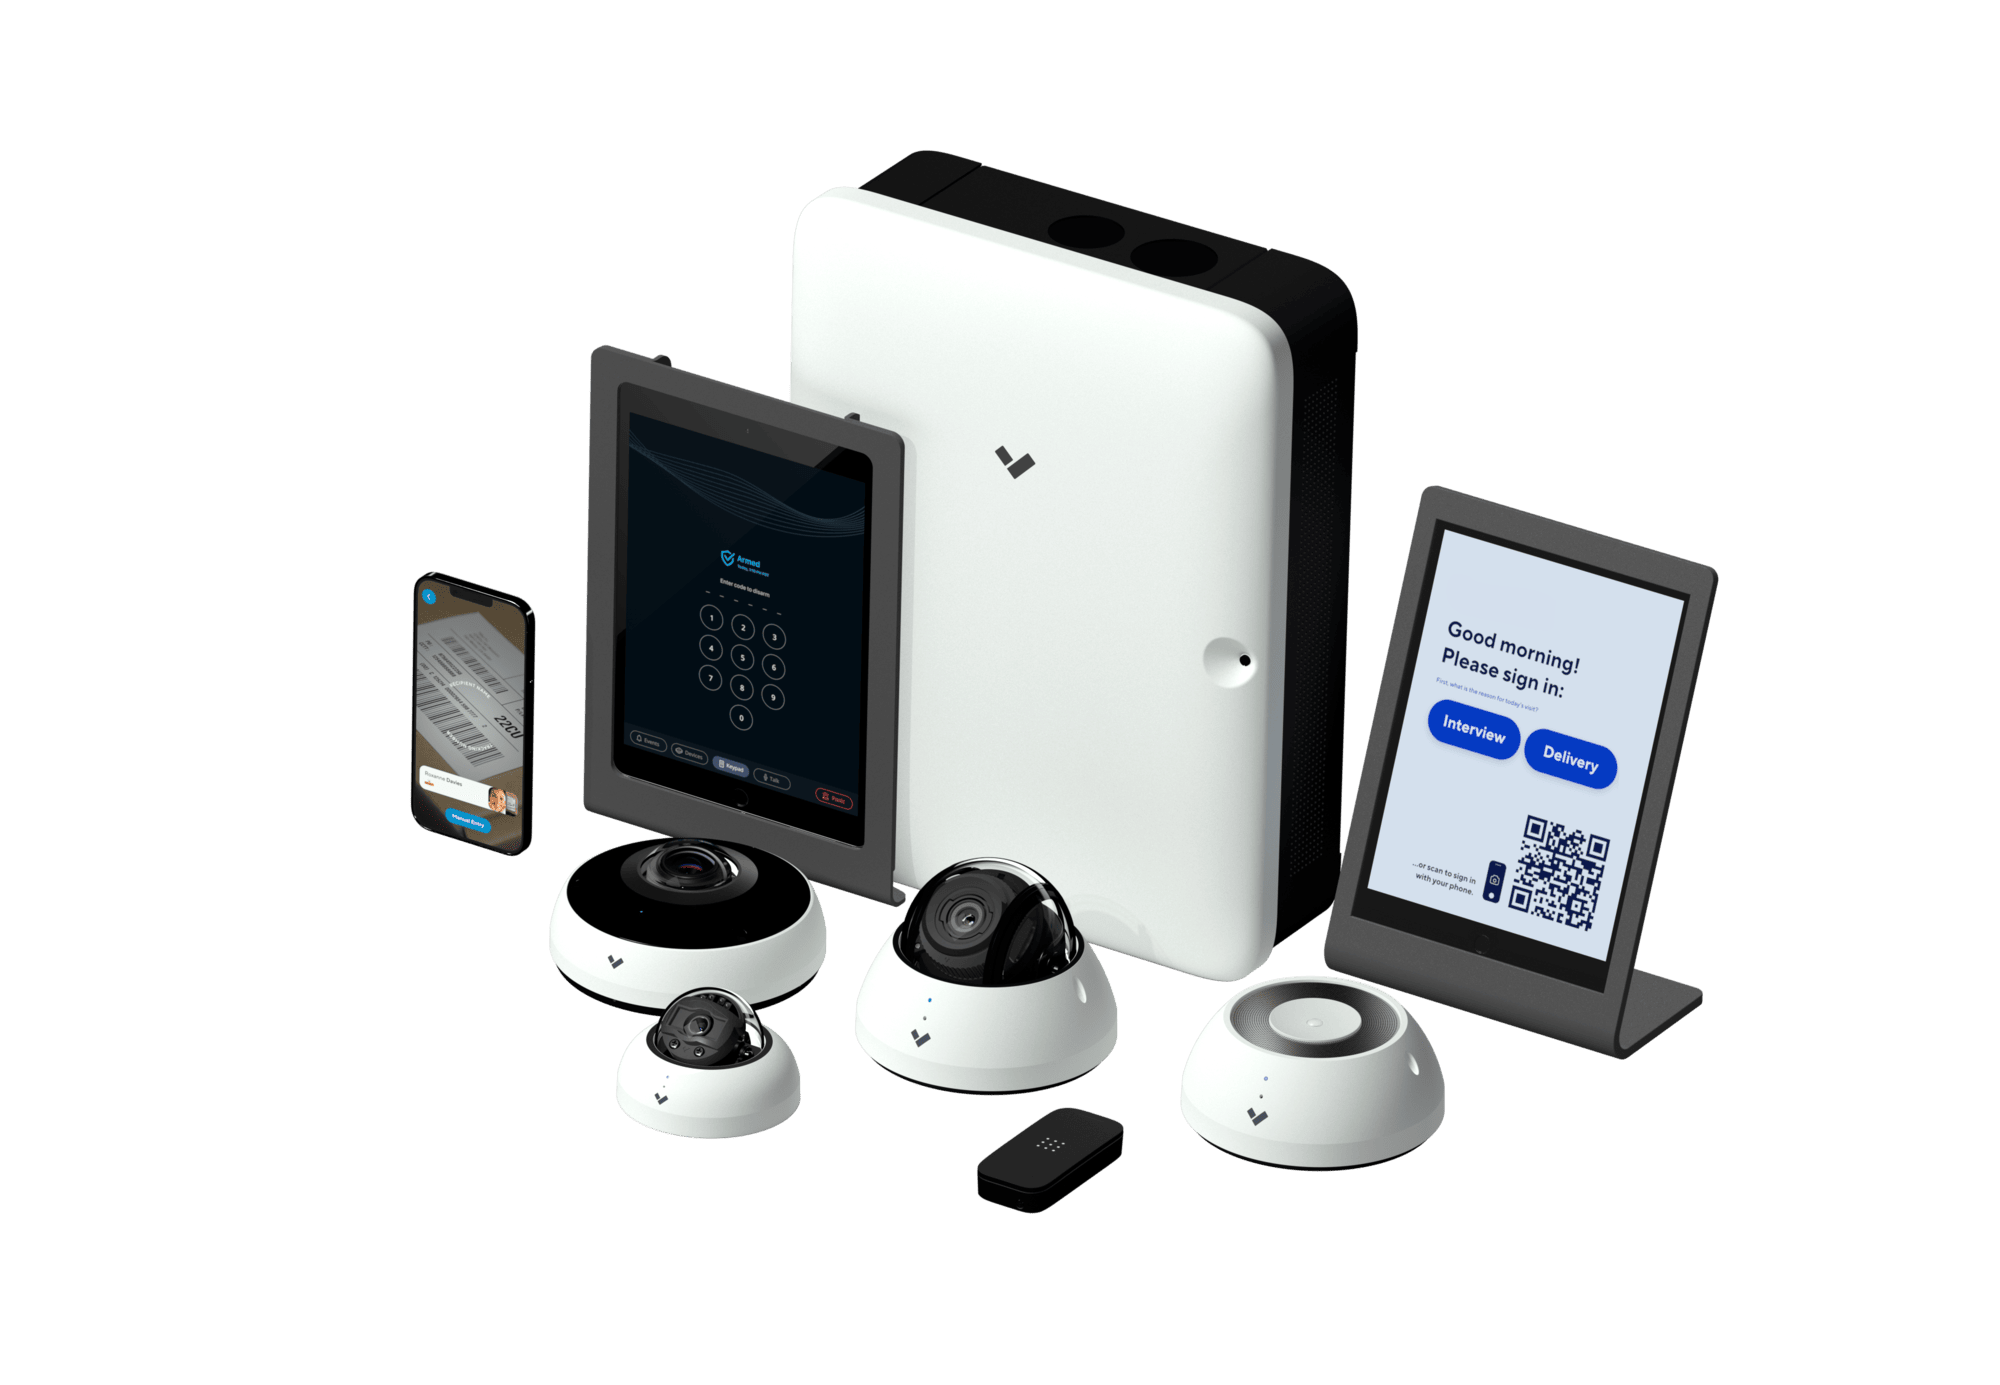 Verkada device family leaves no room to wonder, “what is the best video quality for security cameras”